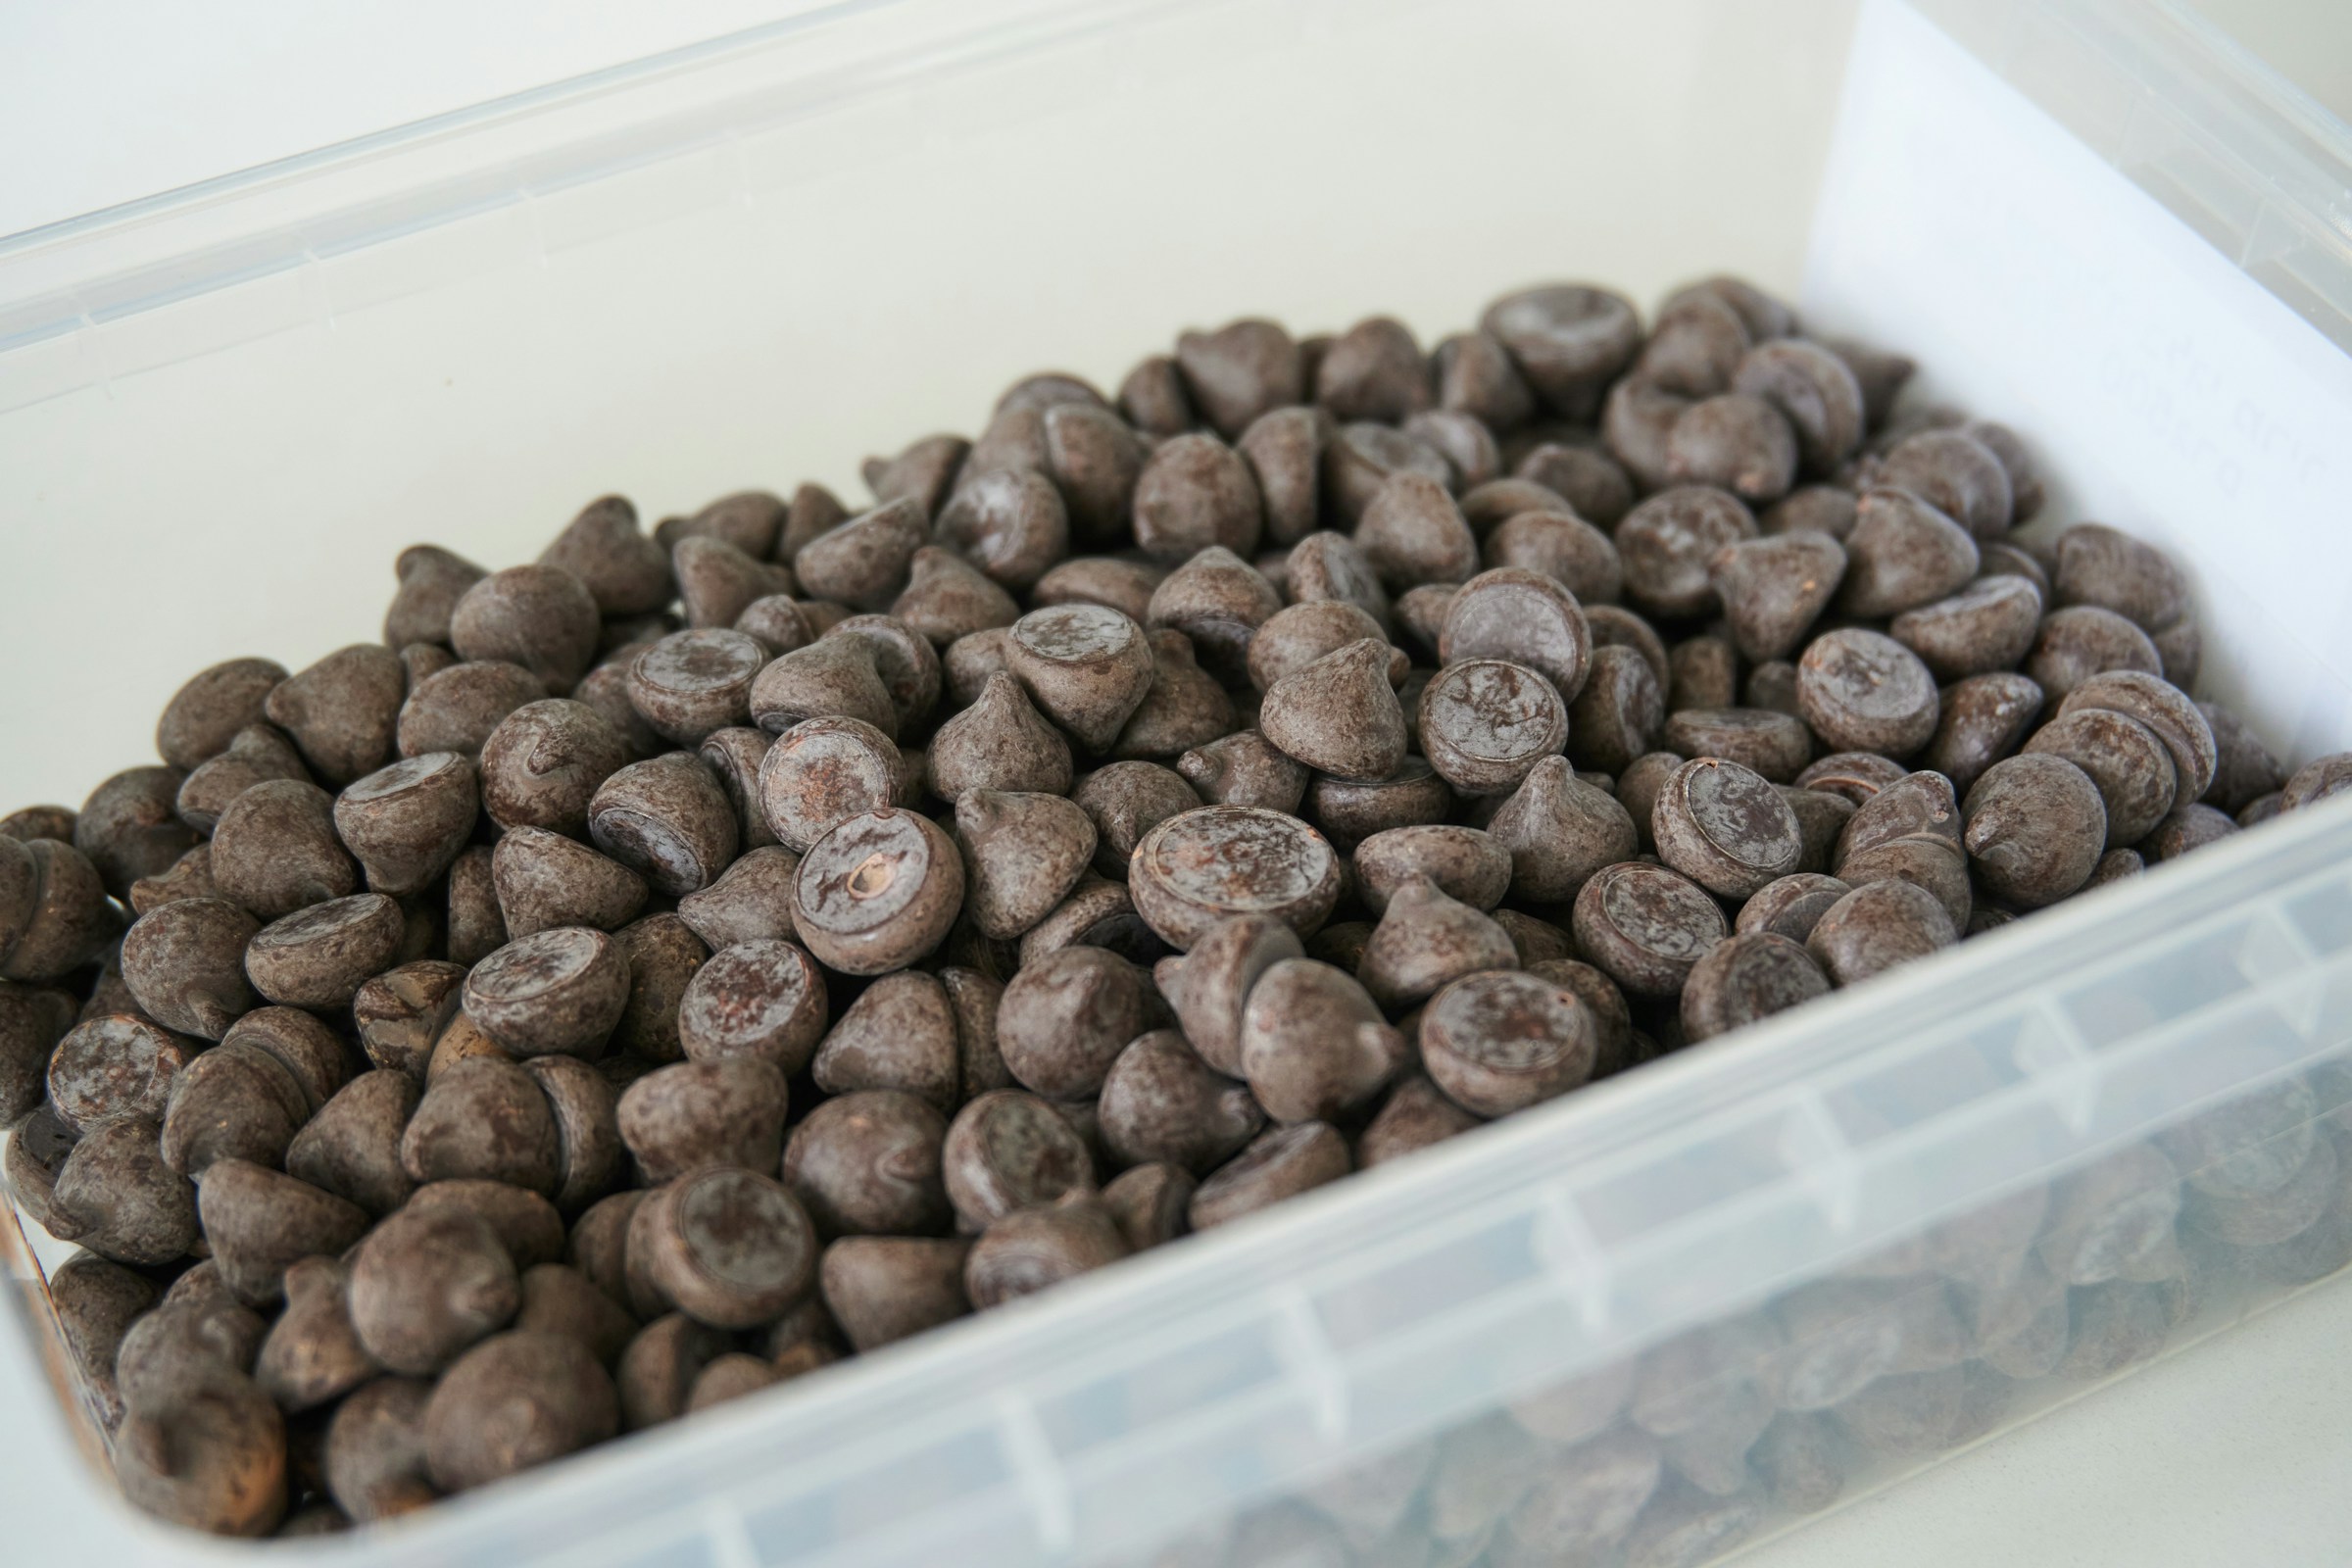 A container of chocolate chips | Source: Unsplash